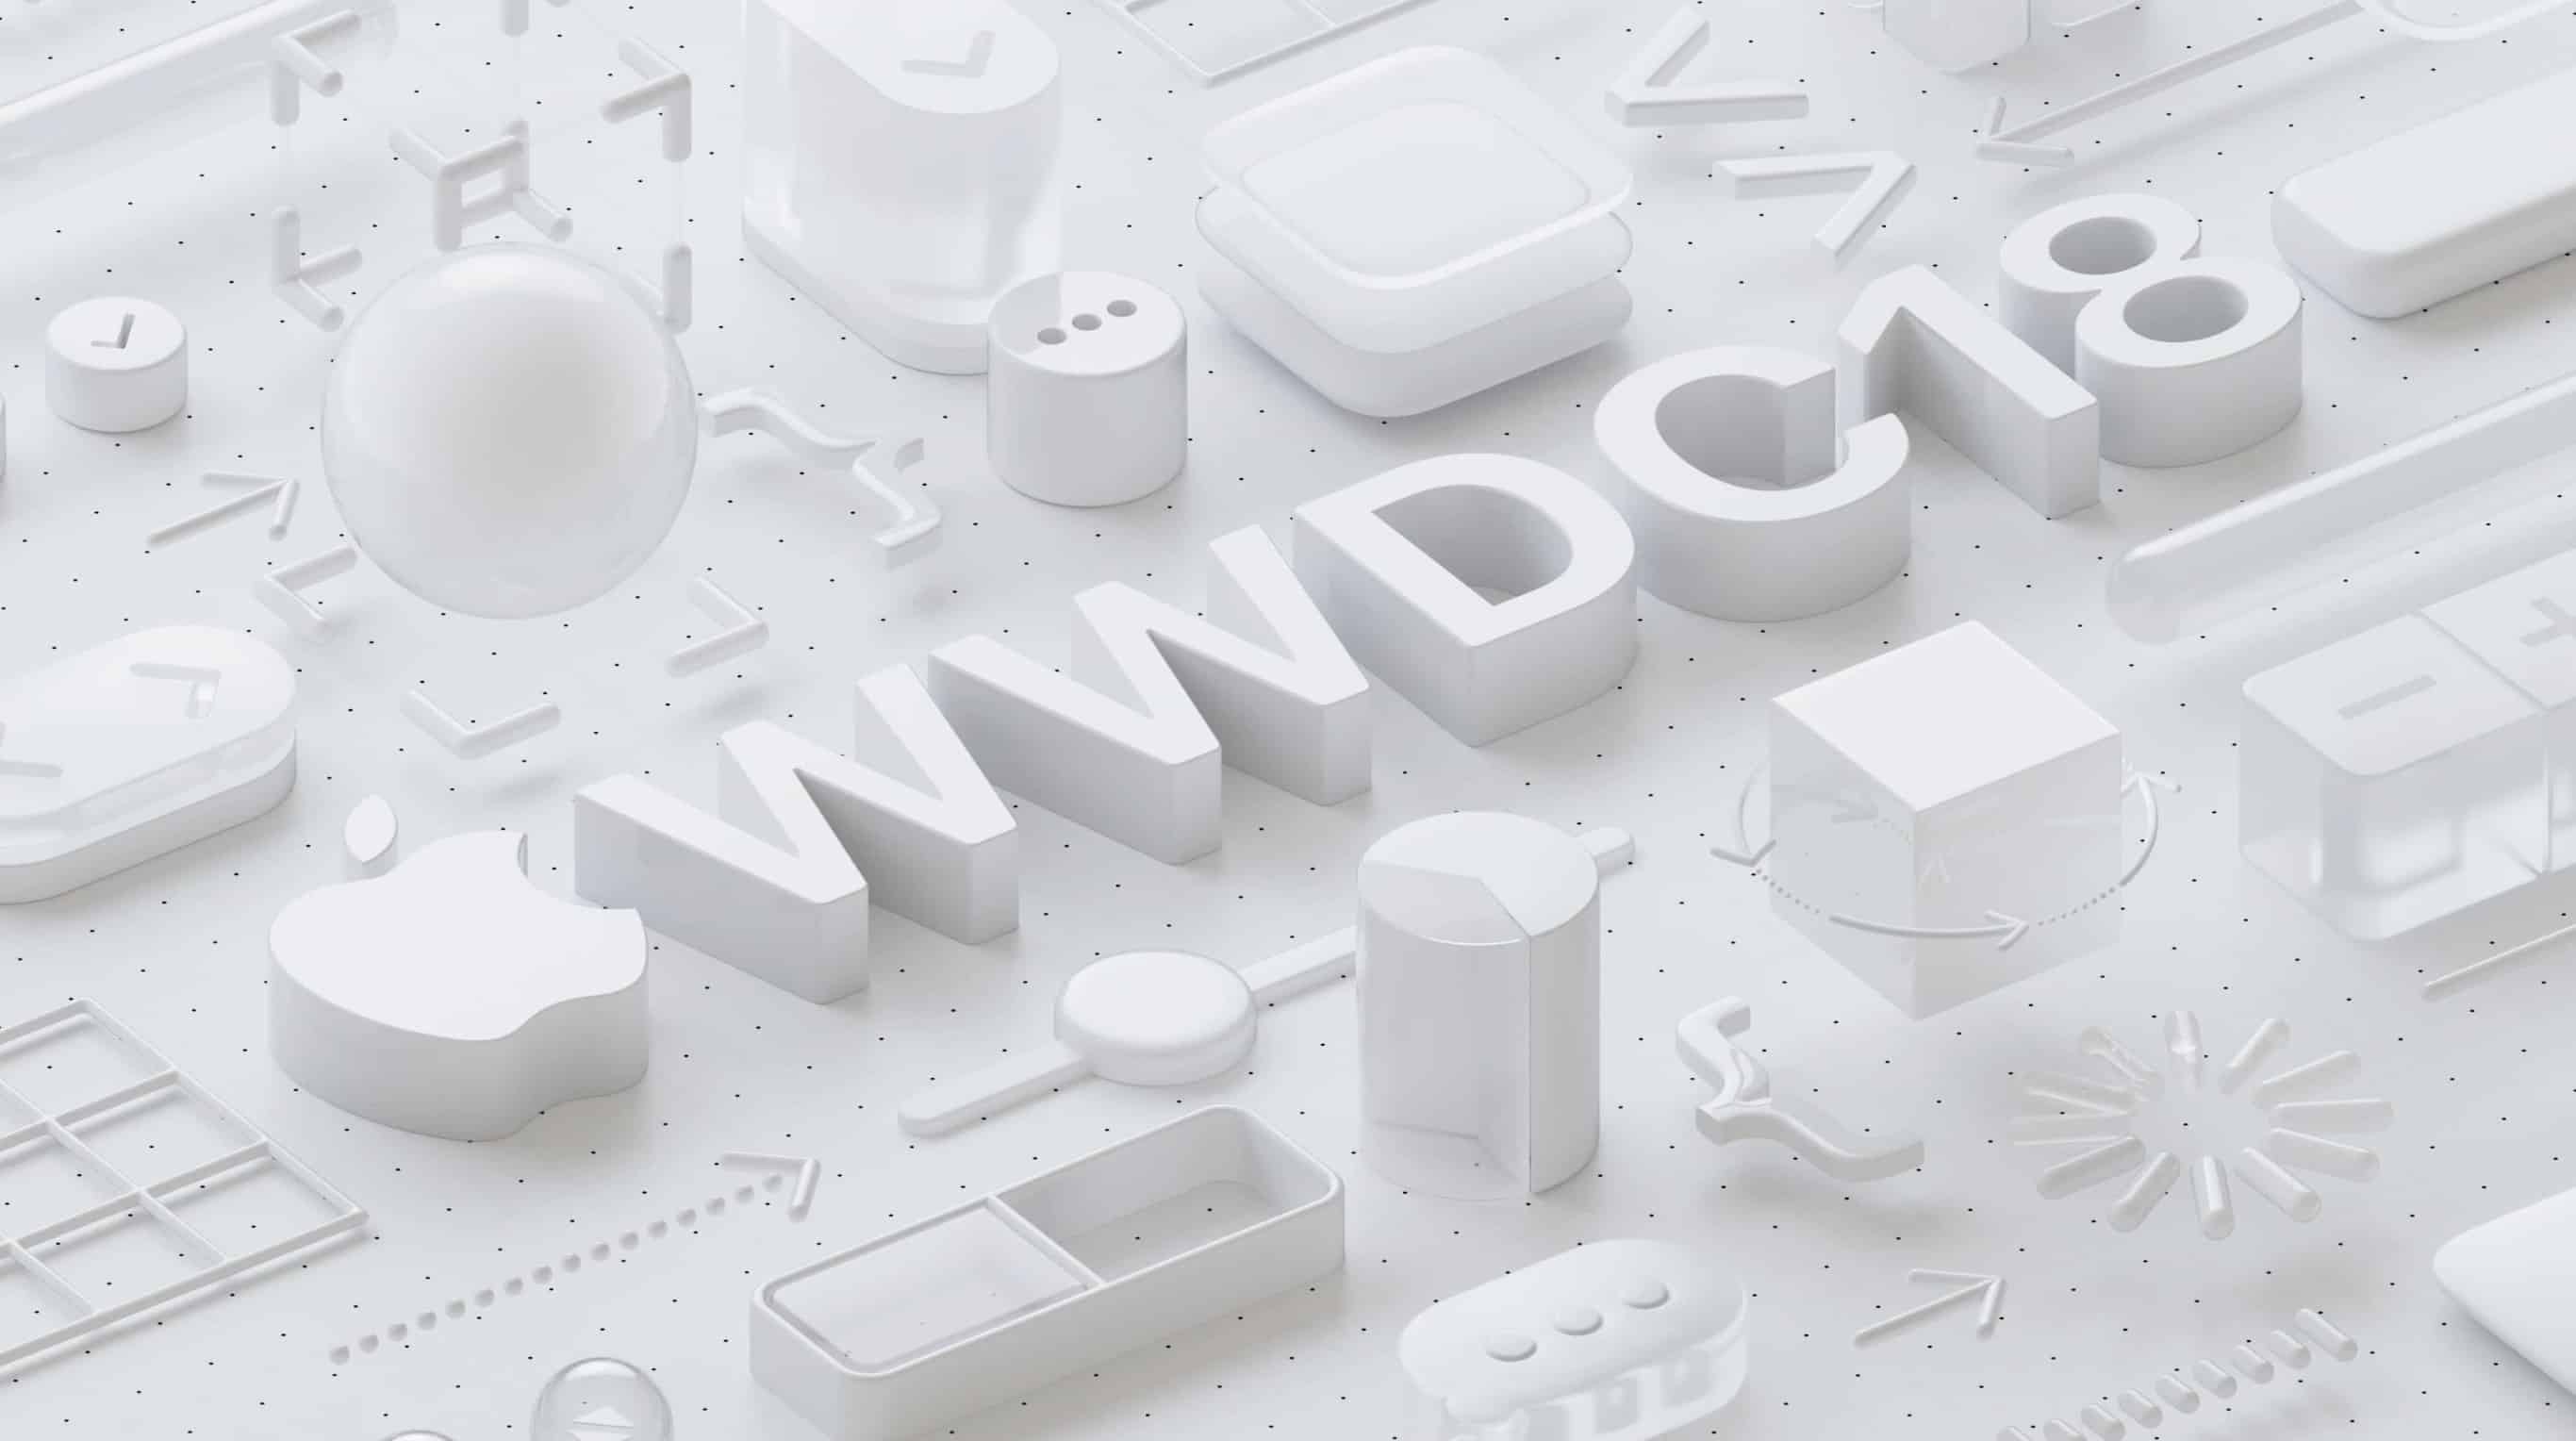 WWDC scholarships are available